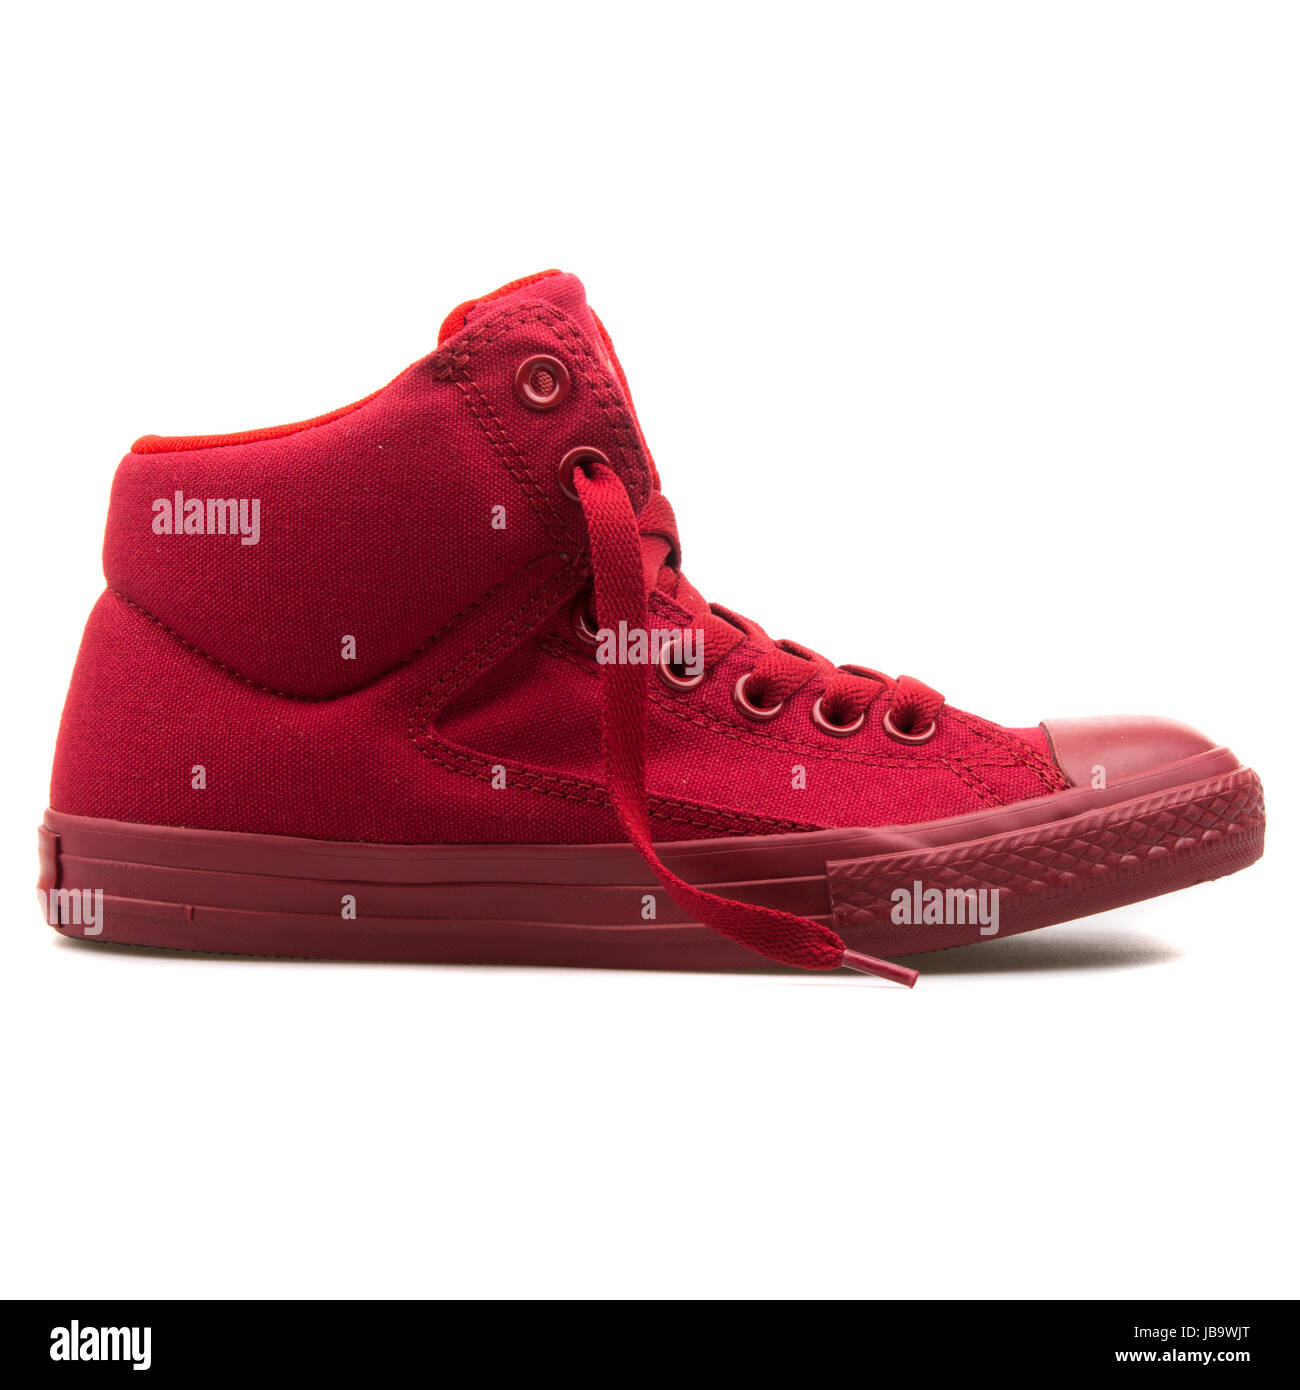 Converse Chuck Taylor All Star High Street Chilli Paste Red Junior's Shoes  - 650120C Stock Photo - Alamy